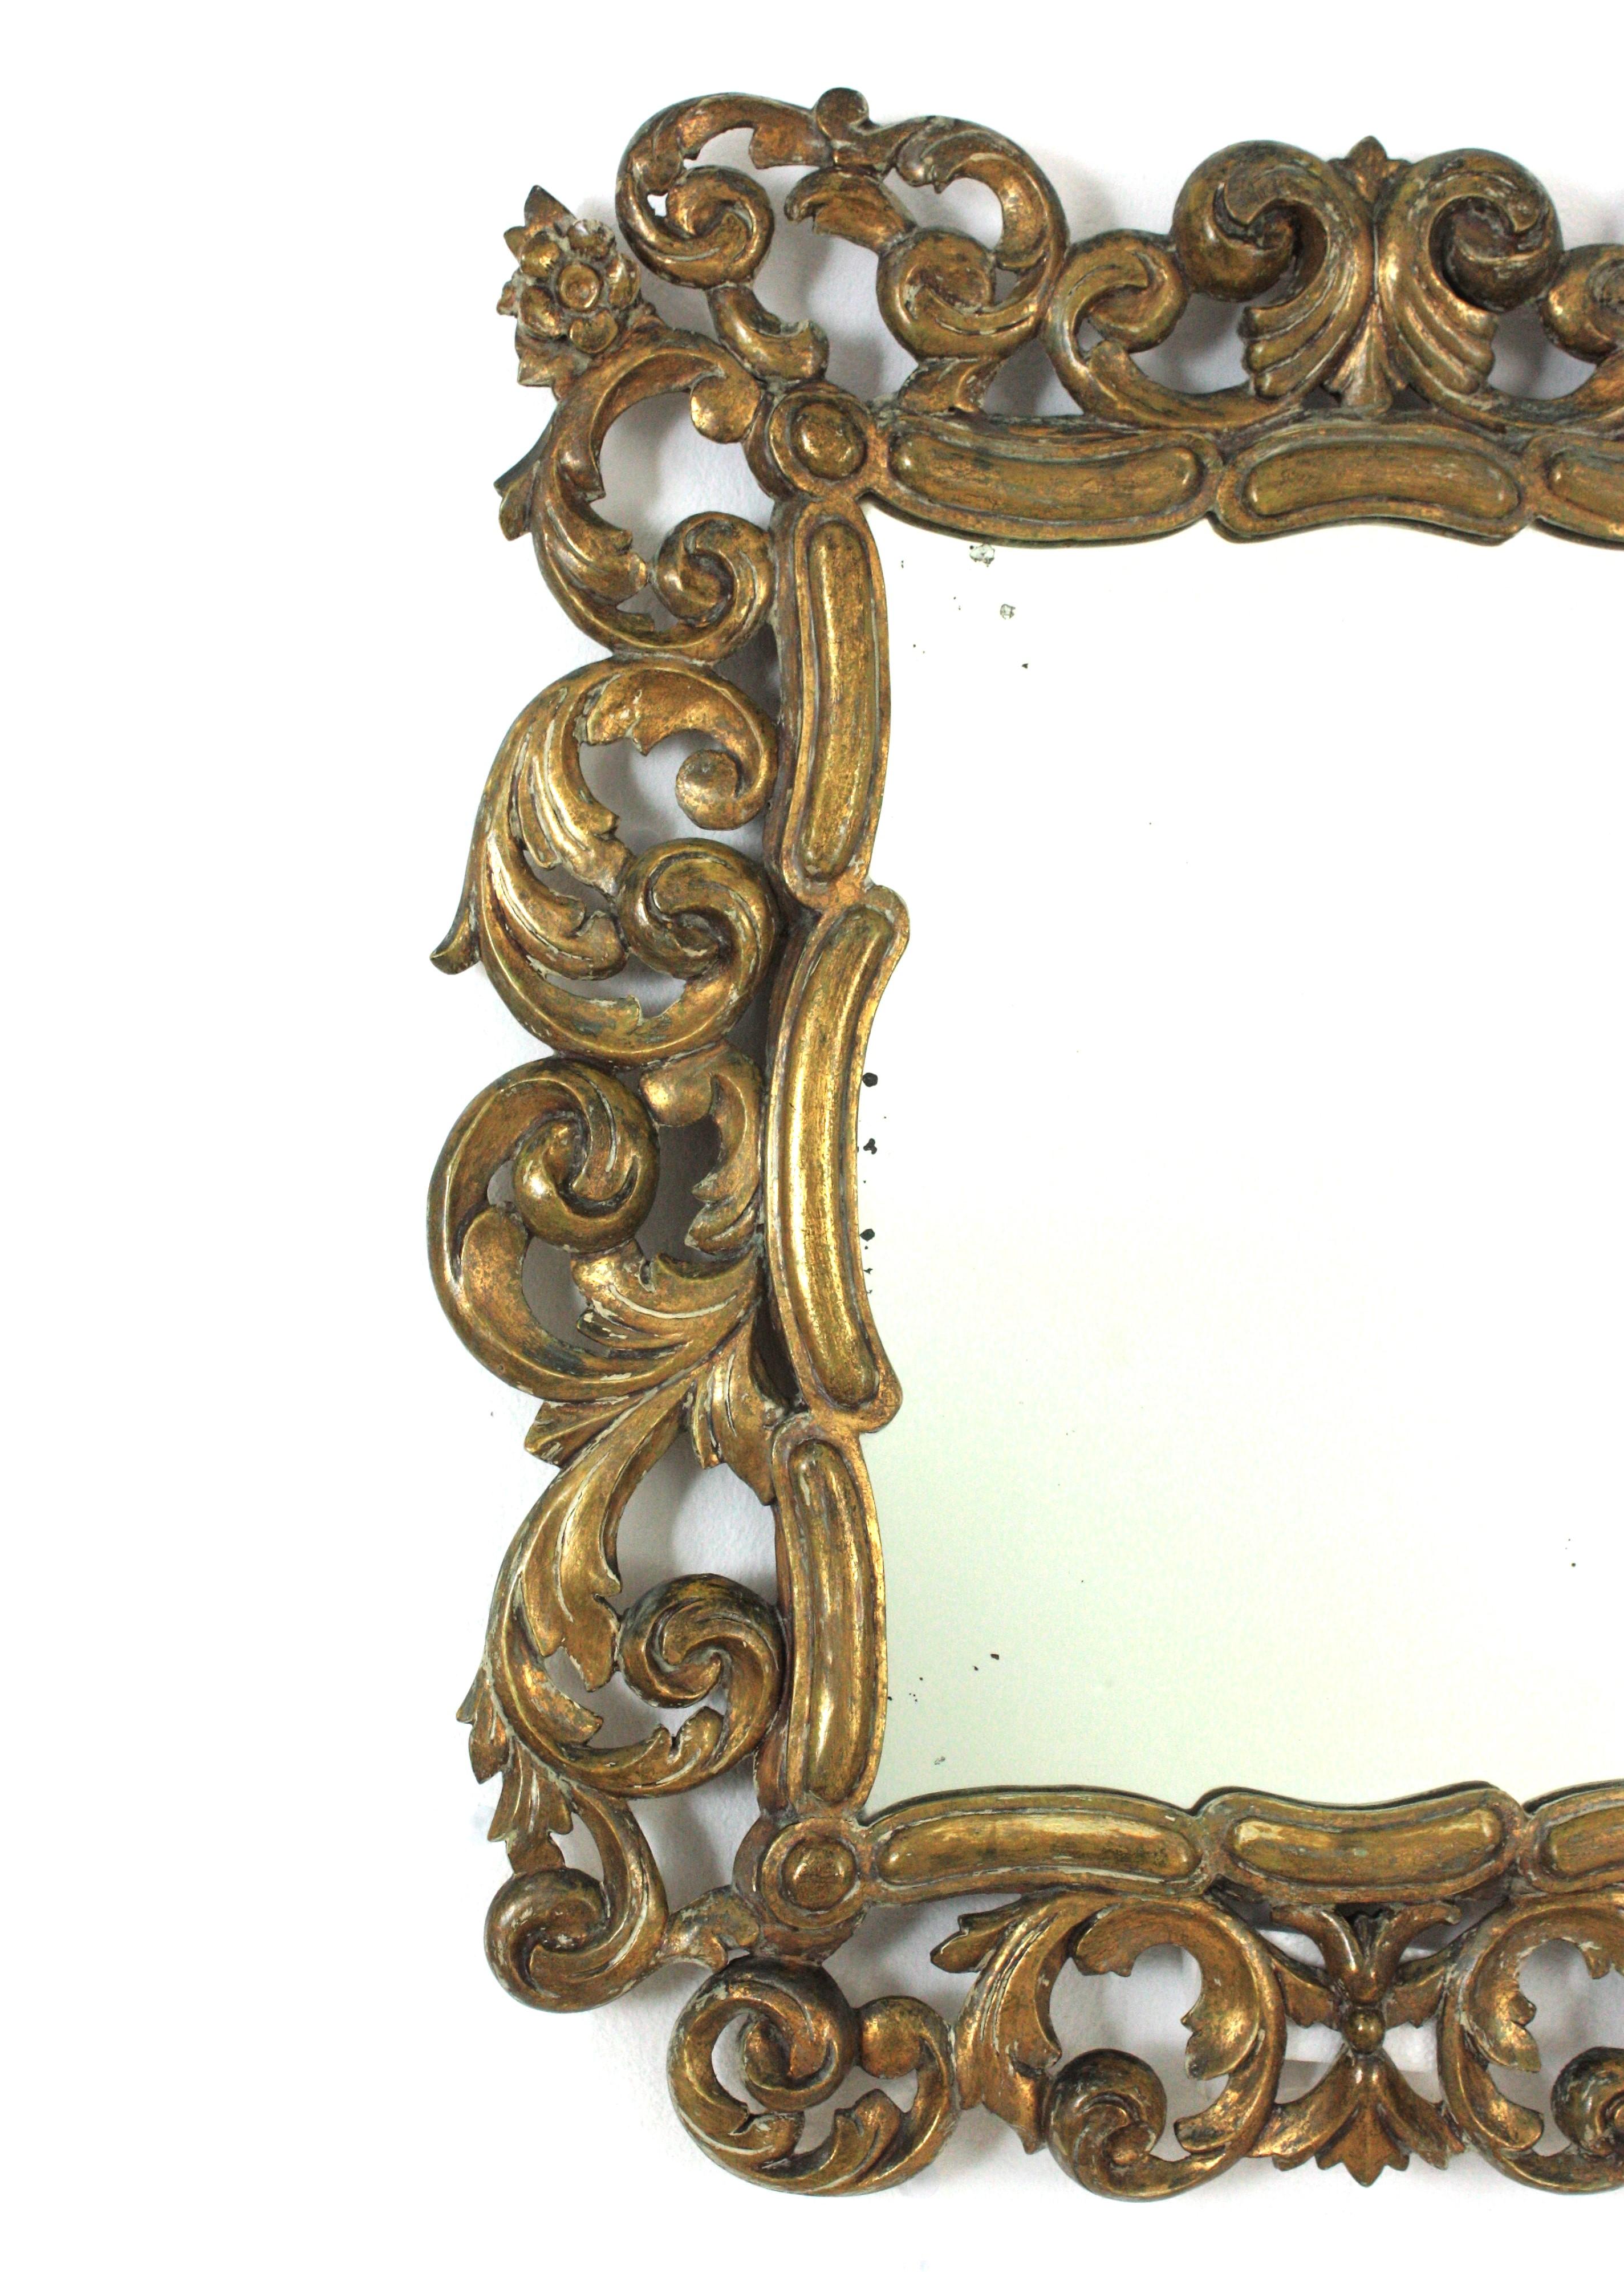 20th Century Spanish Foliage Gilt Carved Wood Mirror with Scroll Work Design For Sale